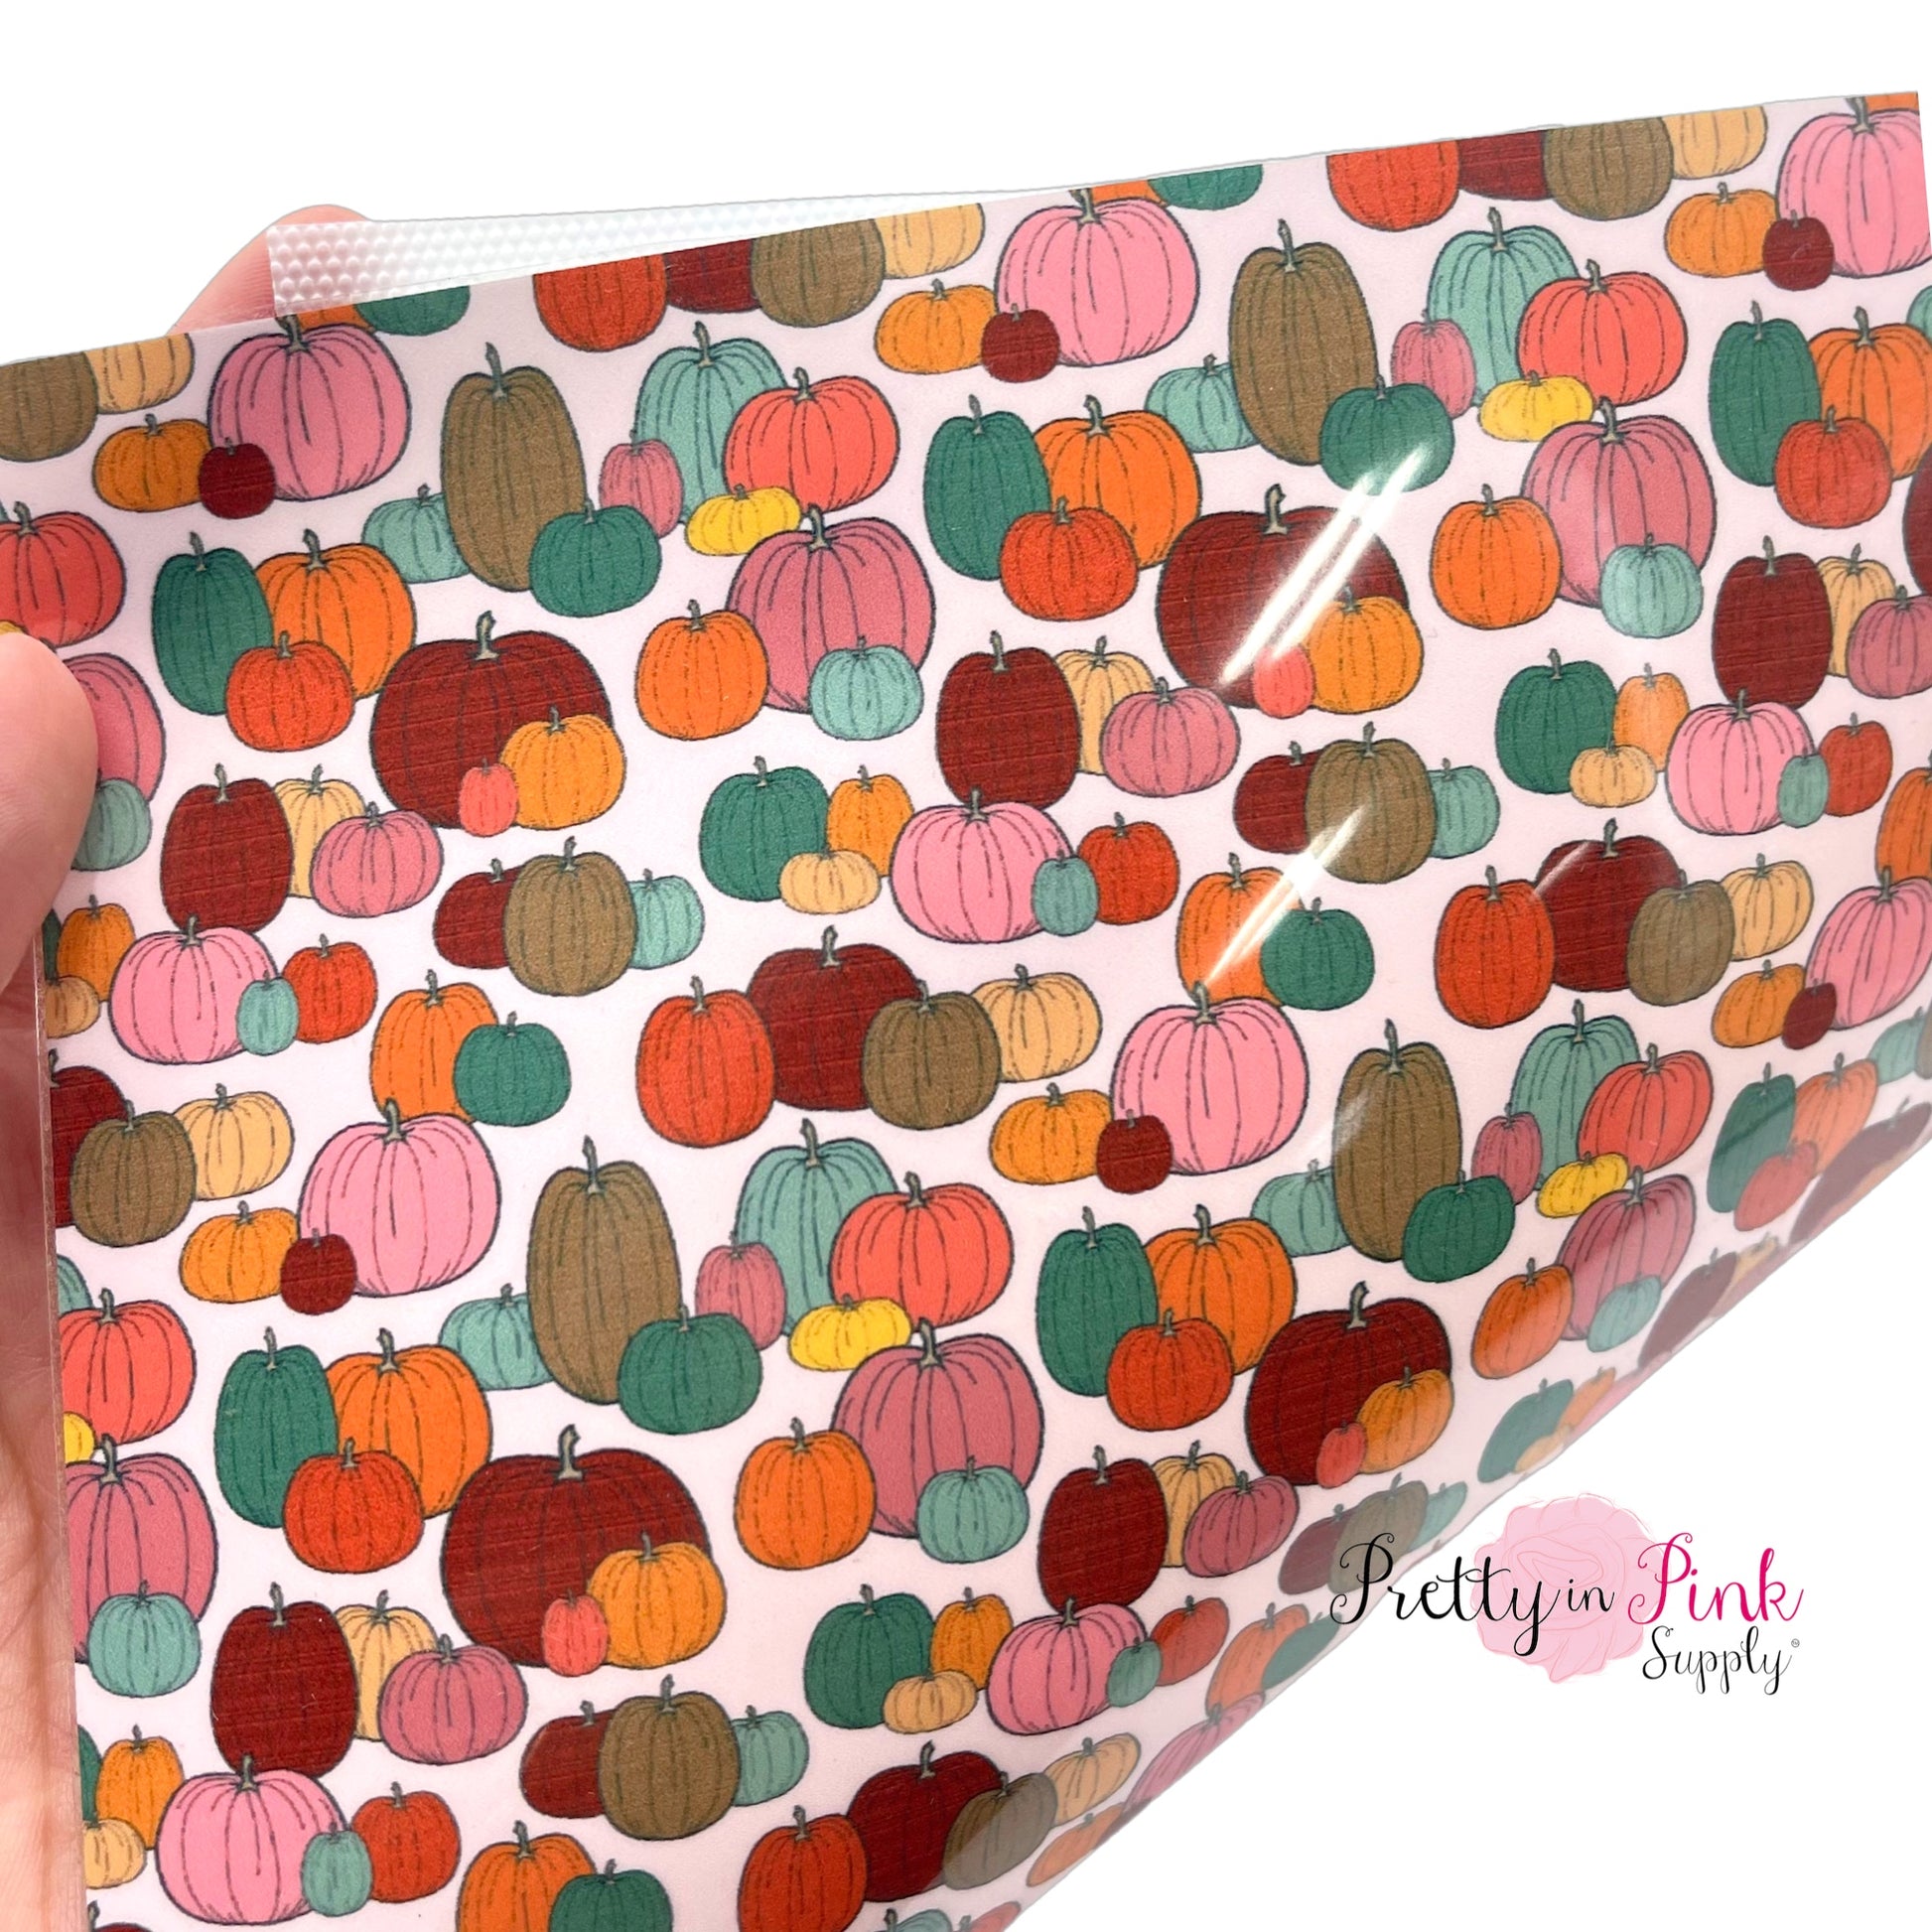 Ivory heat transfer vinyl with pattern of different colored pumpkins.